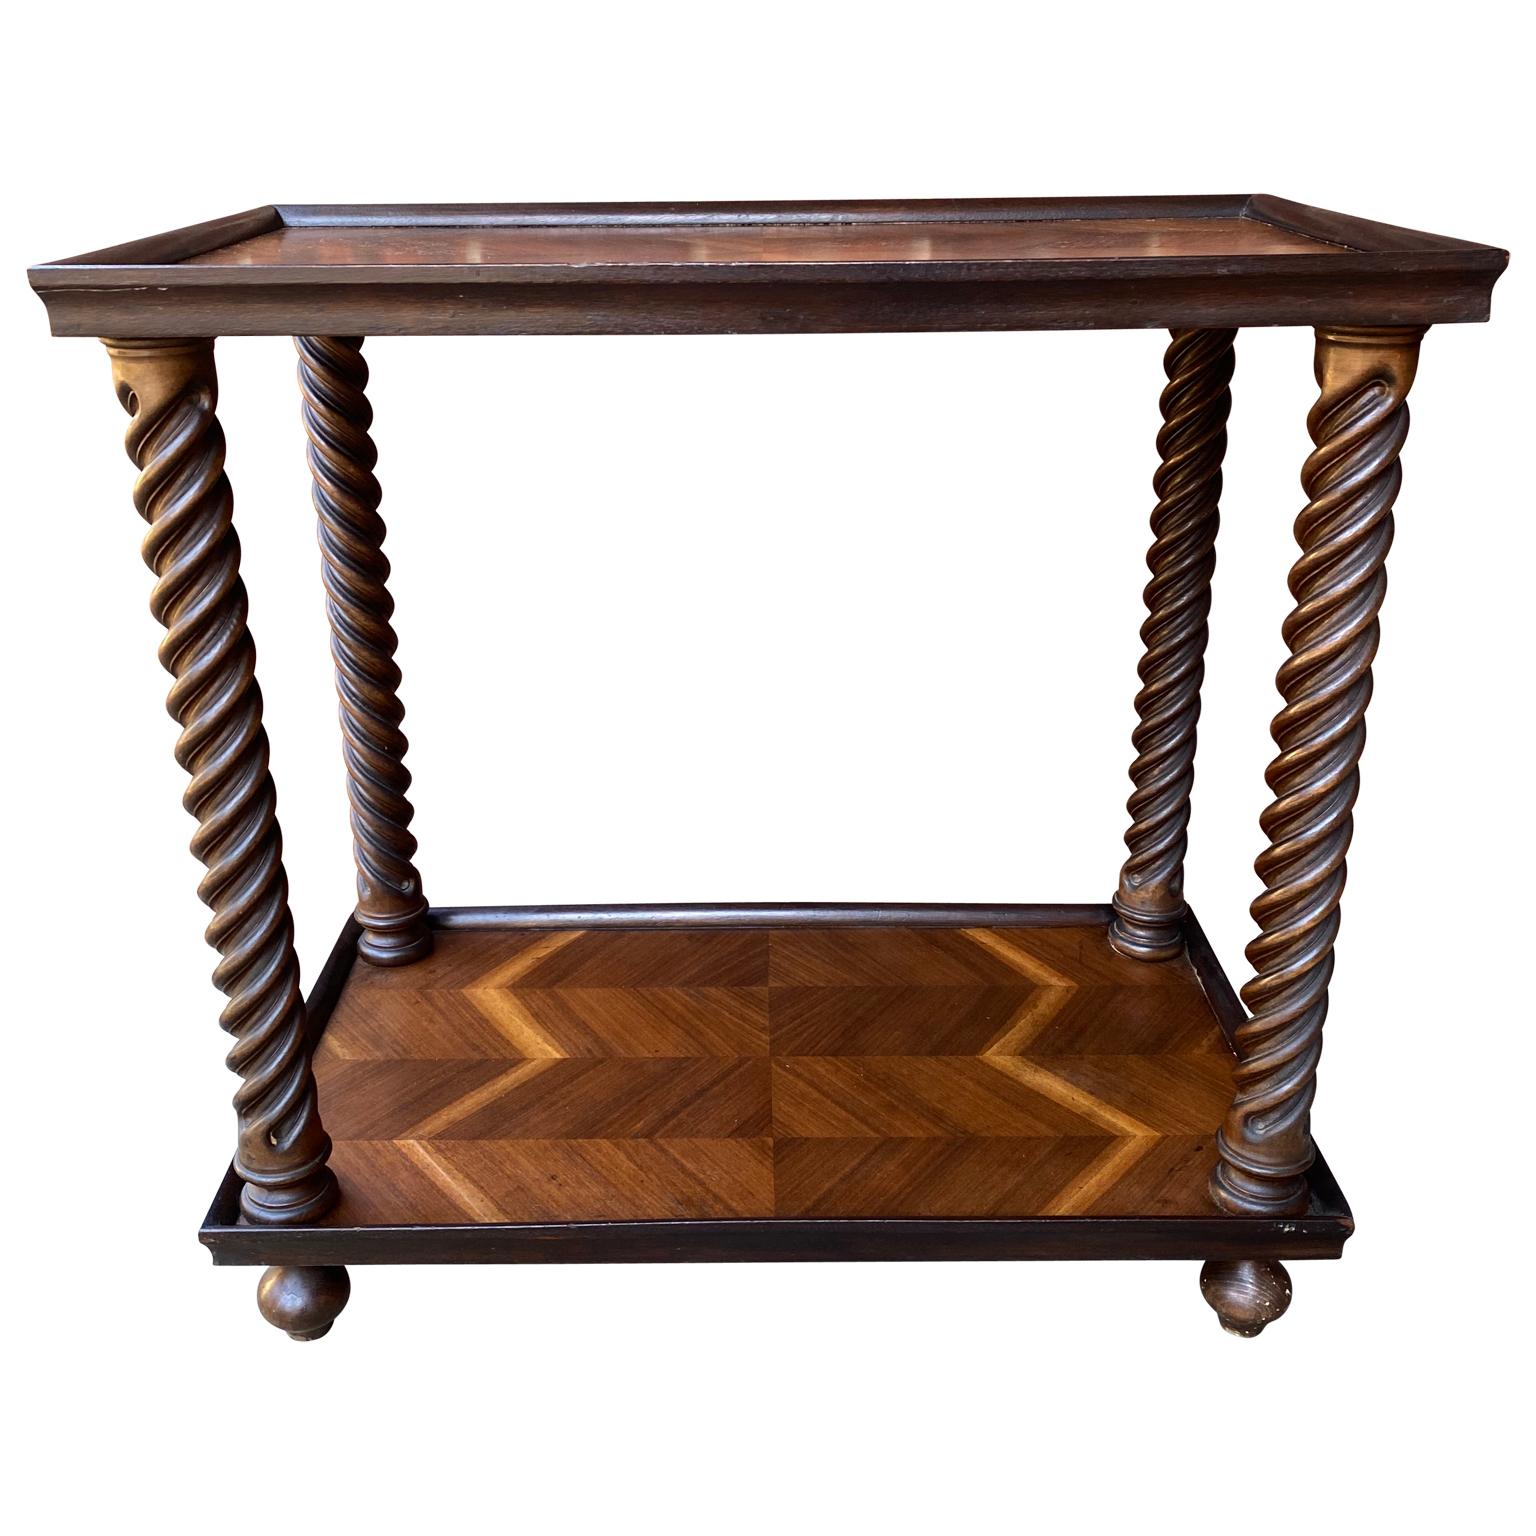 Fruitwood Italian Late 19th Century Wooden Inlaid Two-Tier Bar Cart